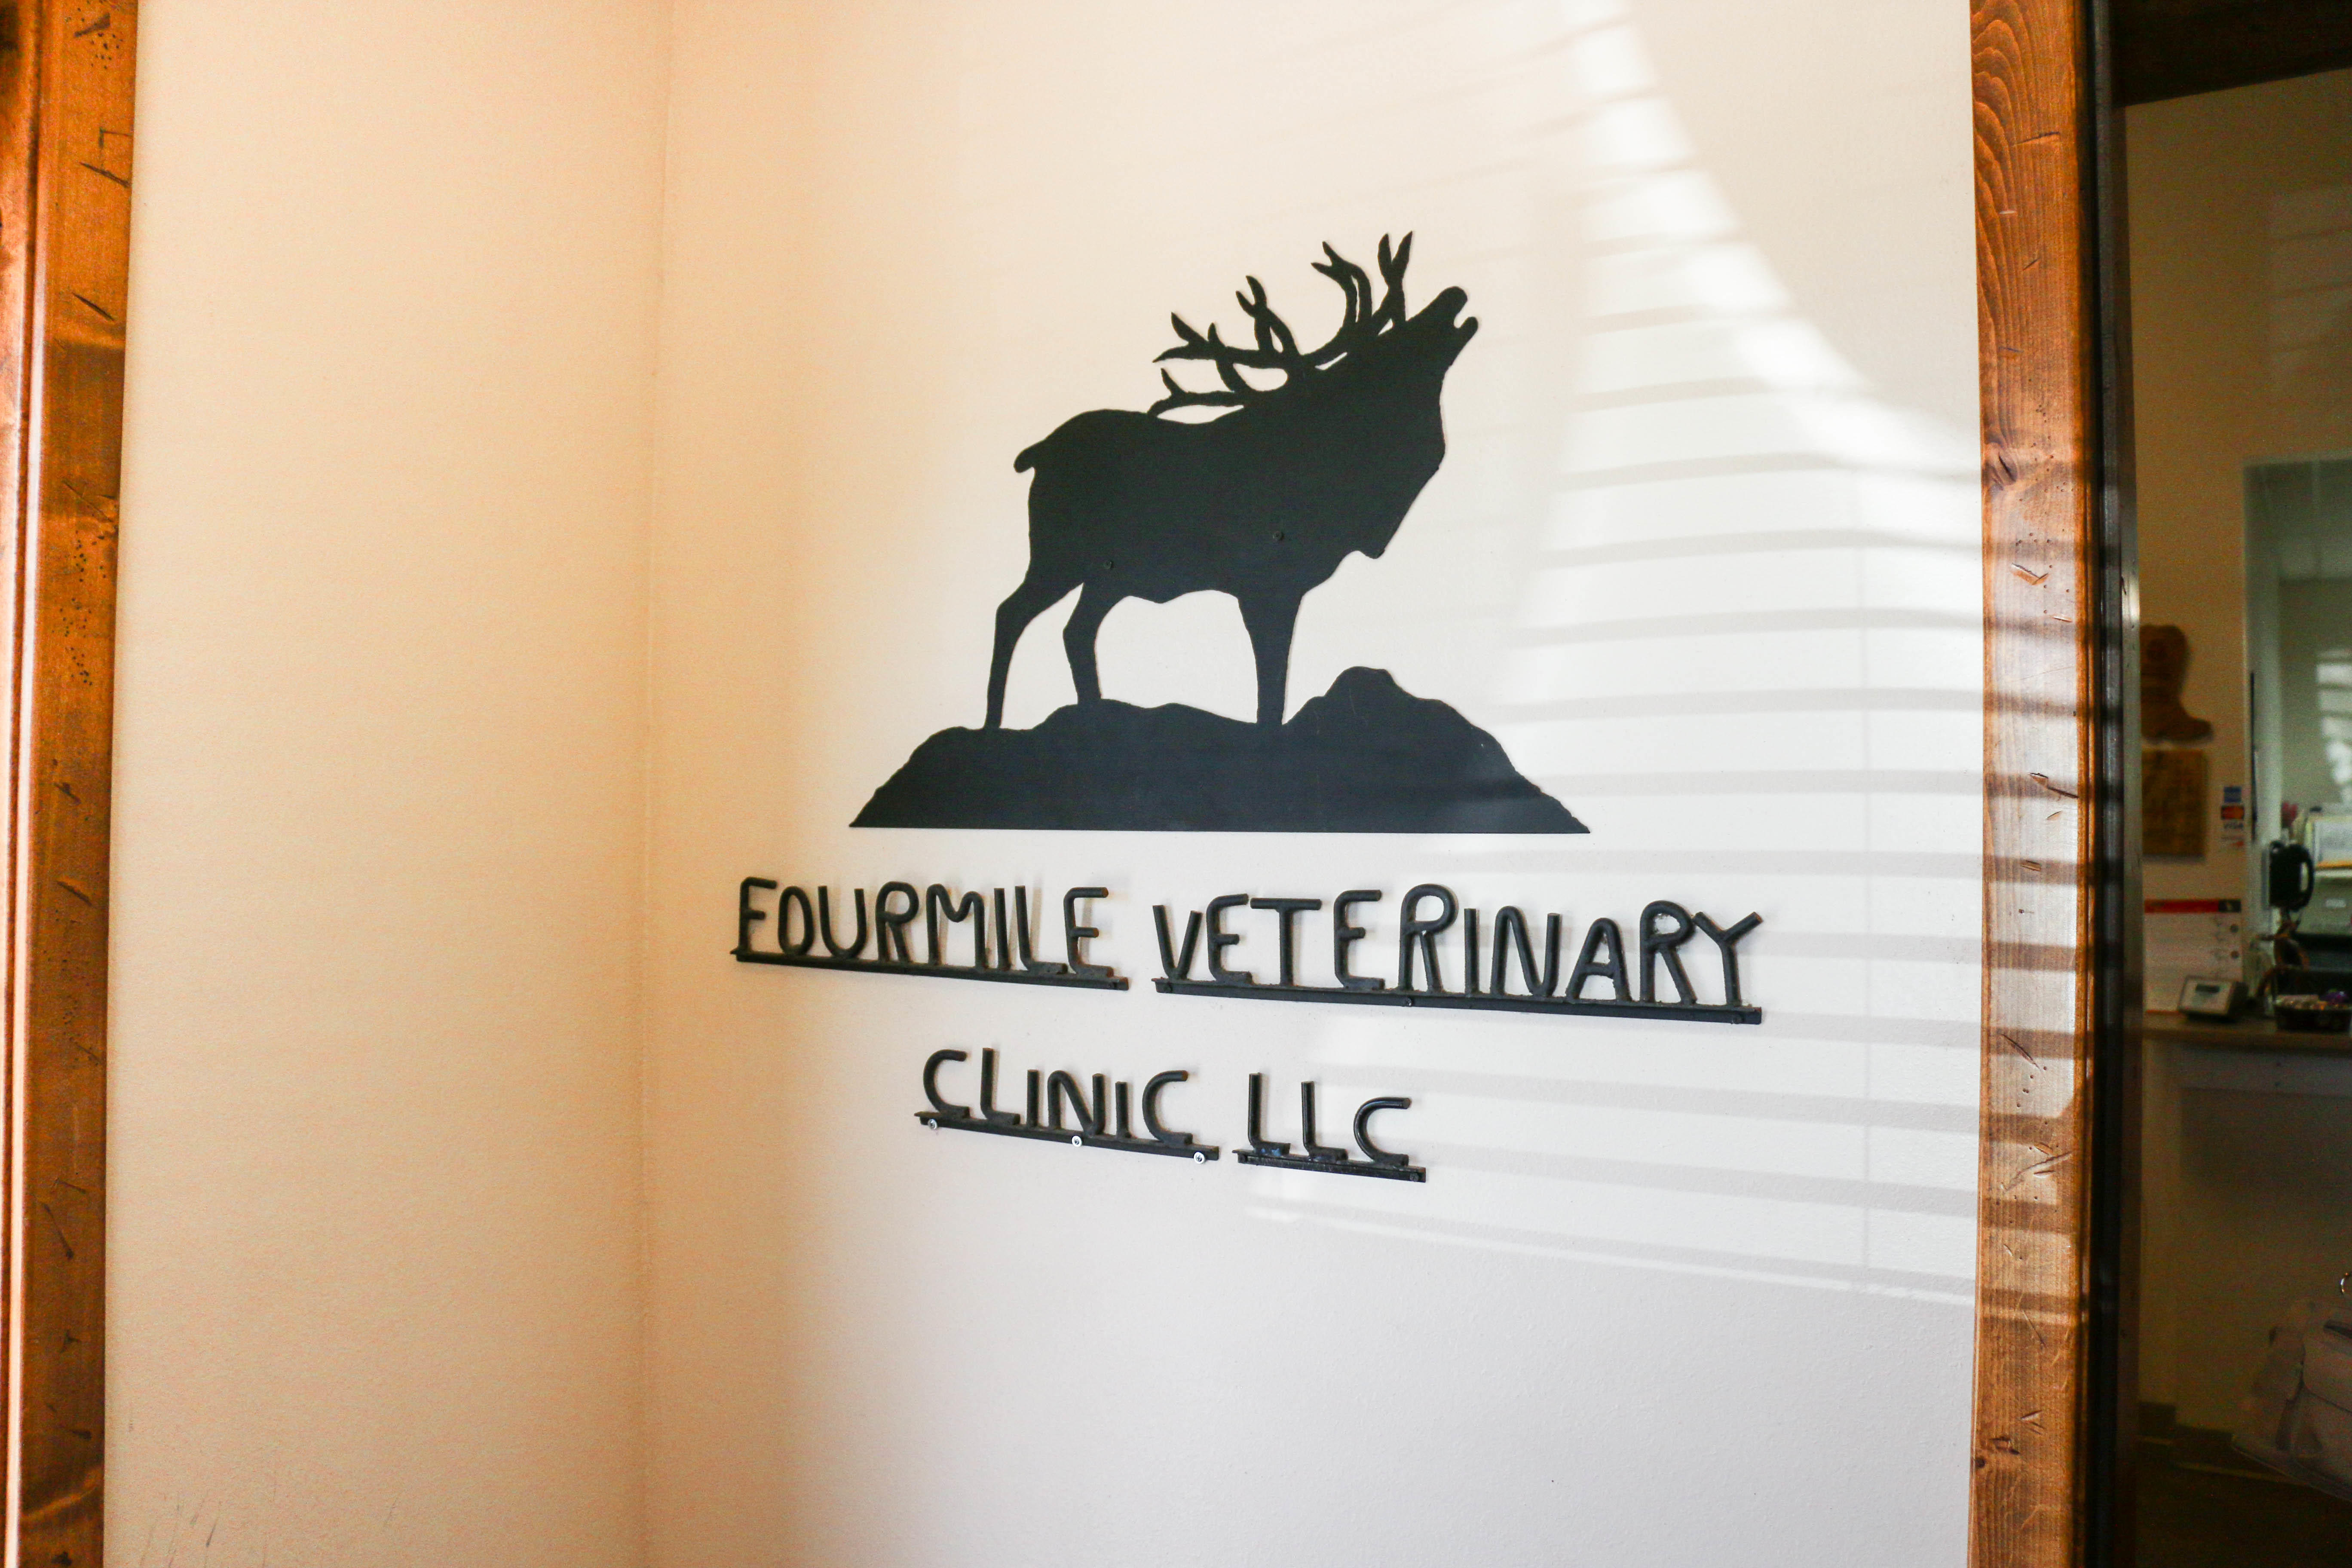 Fourmile Veterinary Clinic has been providing quality animal care to Cañon City and surrounding communities for over 40 years. Whether your dog needs a vaccine, or your horse needs a dental cleaning, we are happy to help!